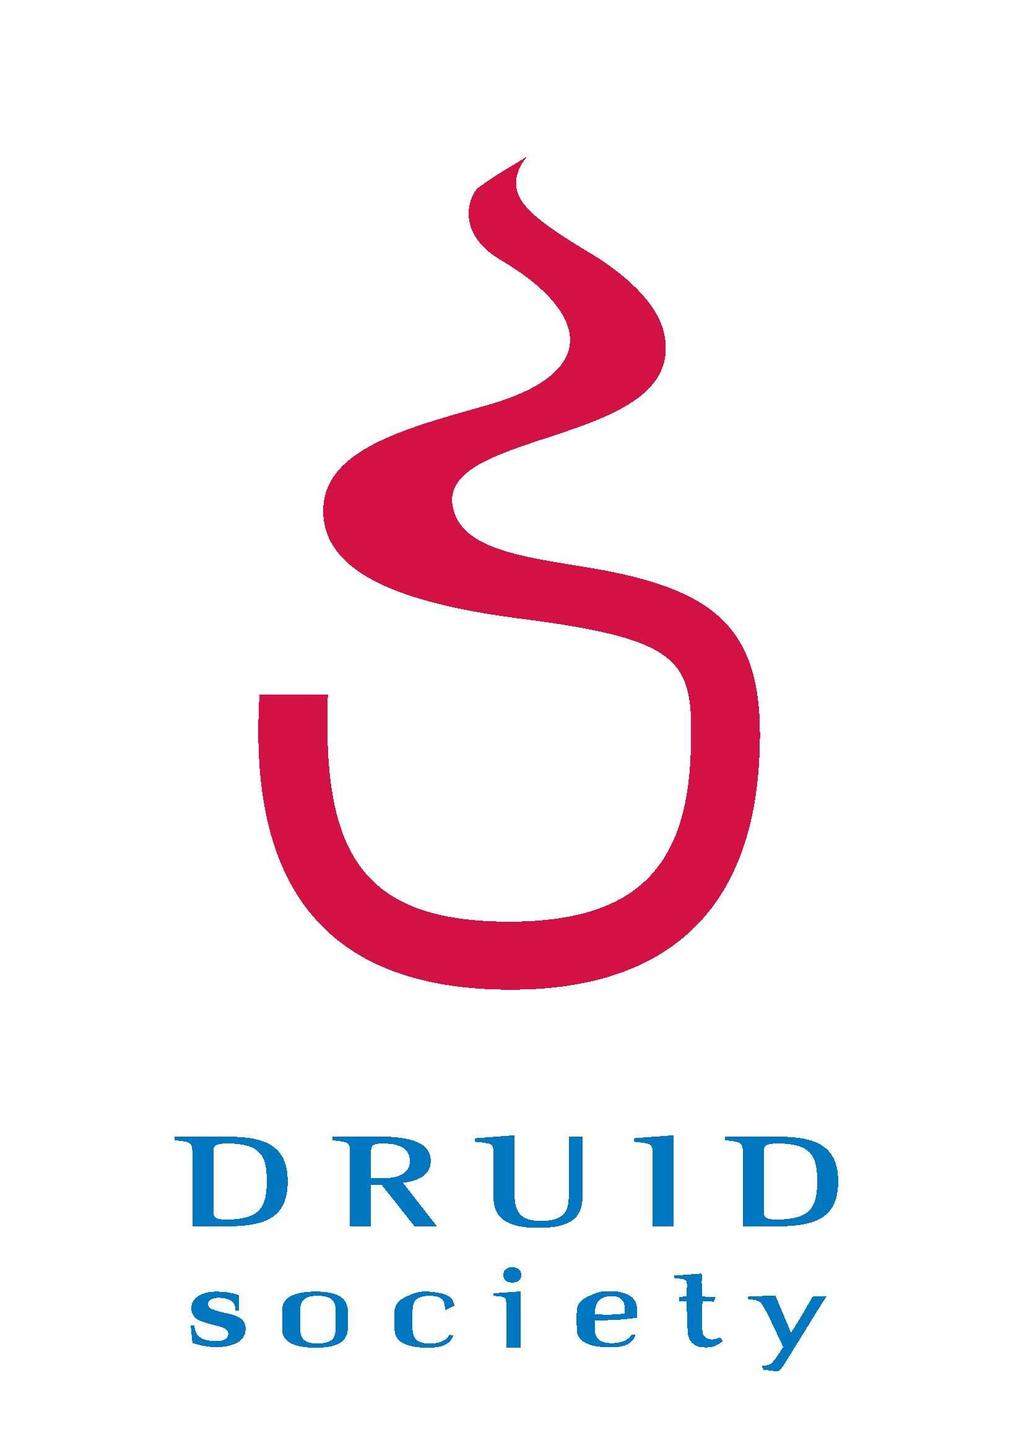 Paper to be presented at DRUID15, Rome, June 15-17, 2015 (Coorganized with LUISS) Returns to international R&D activities in European firms Jaana Rahko University of Vaasa Department of Economics